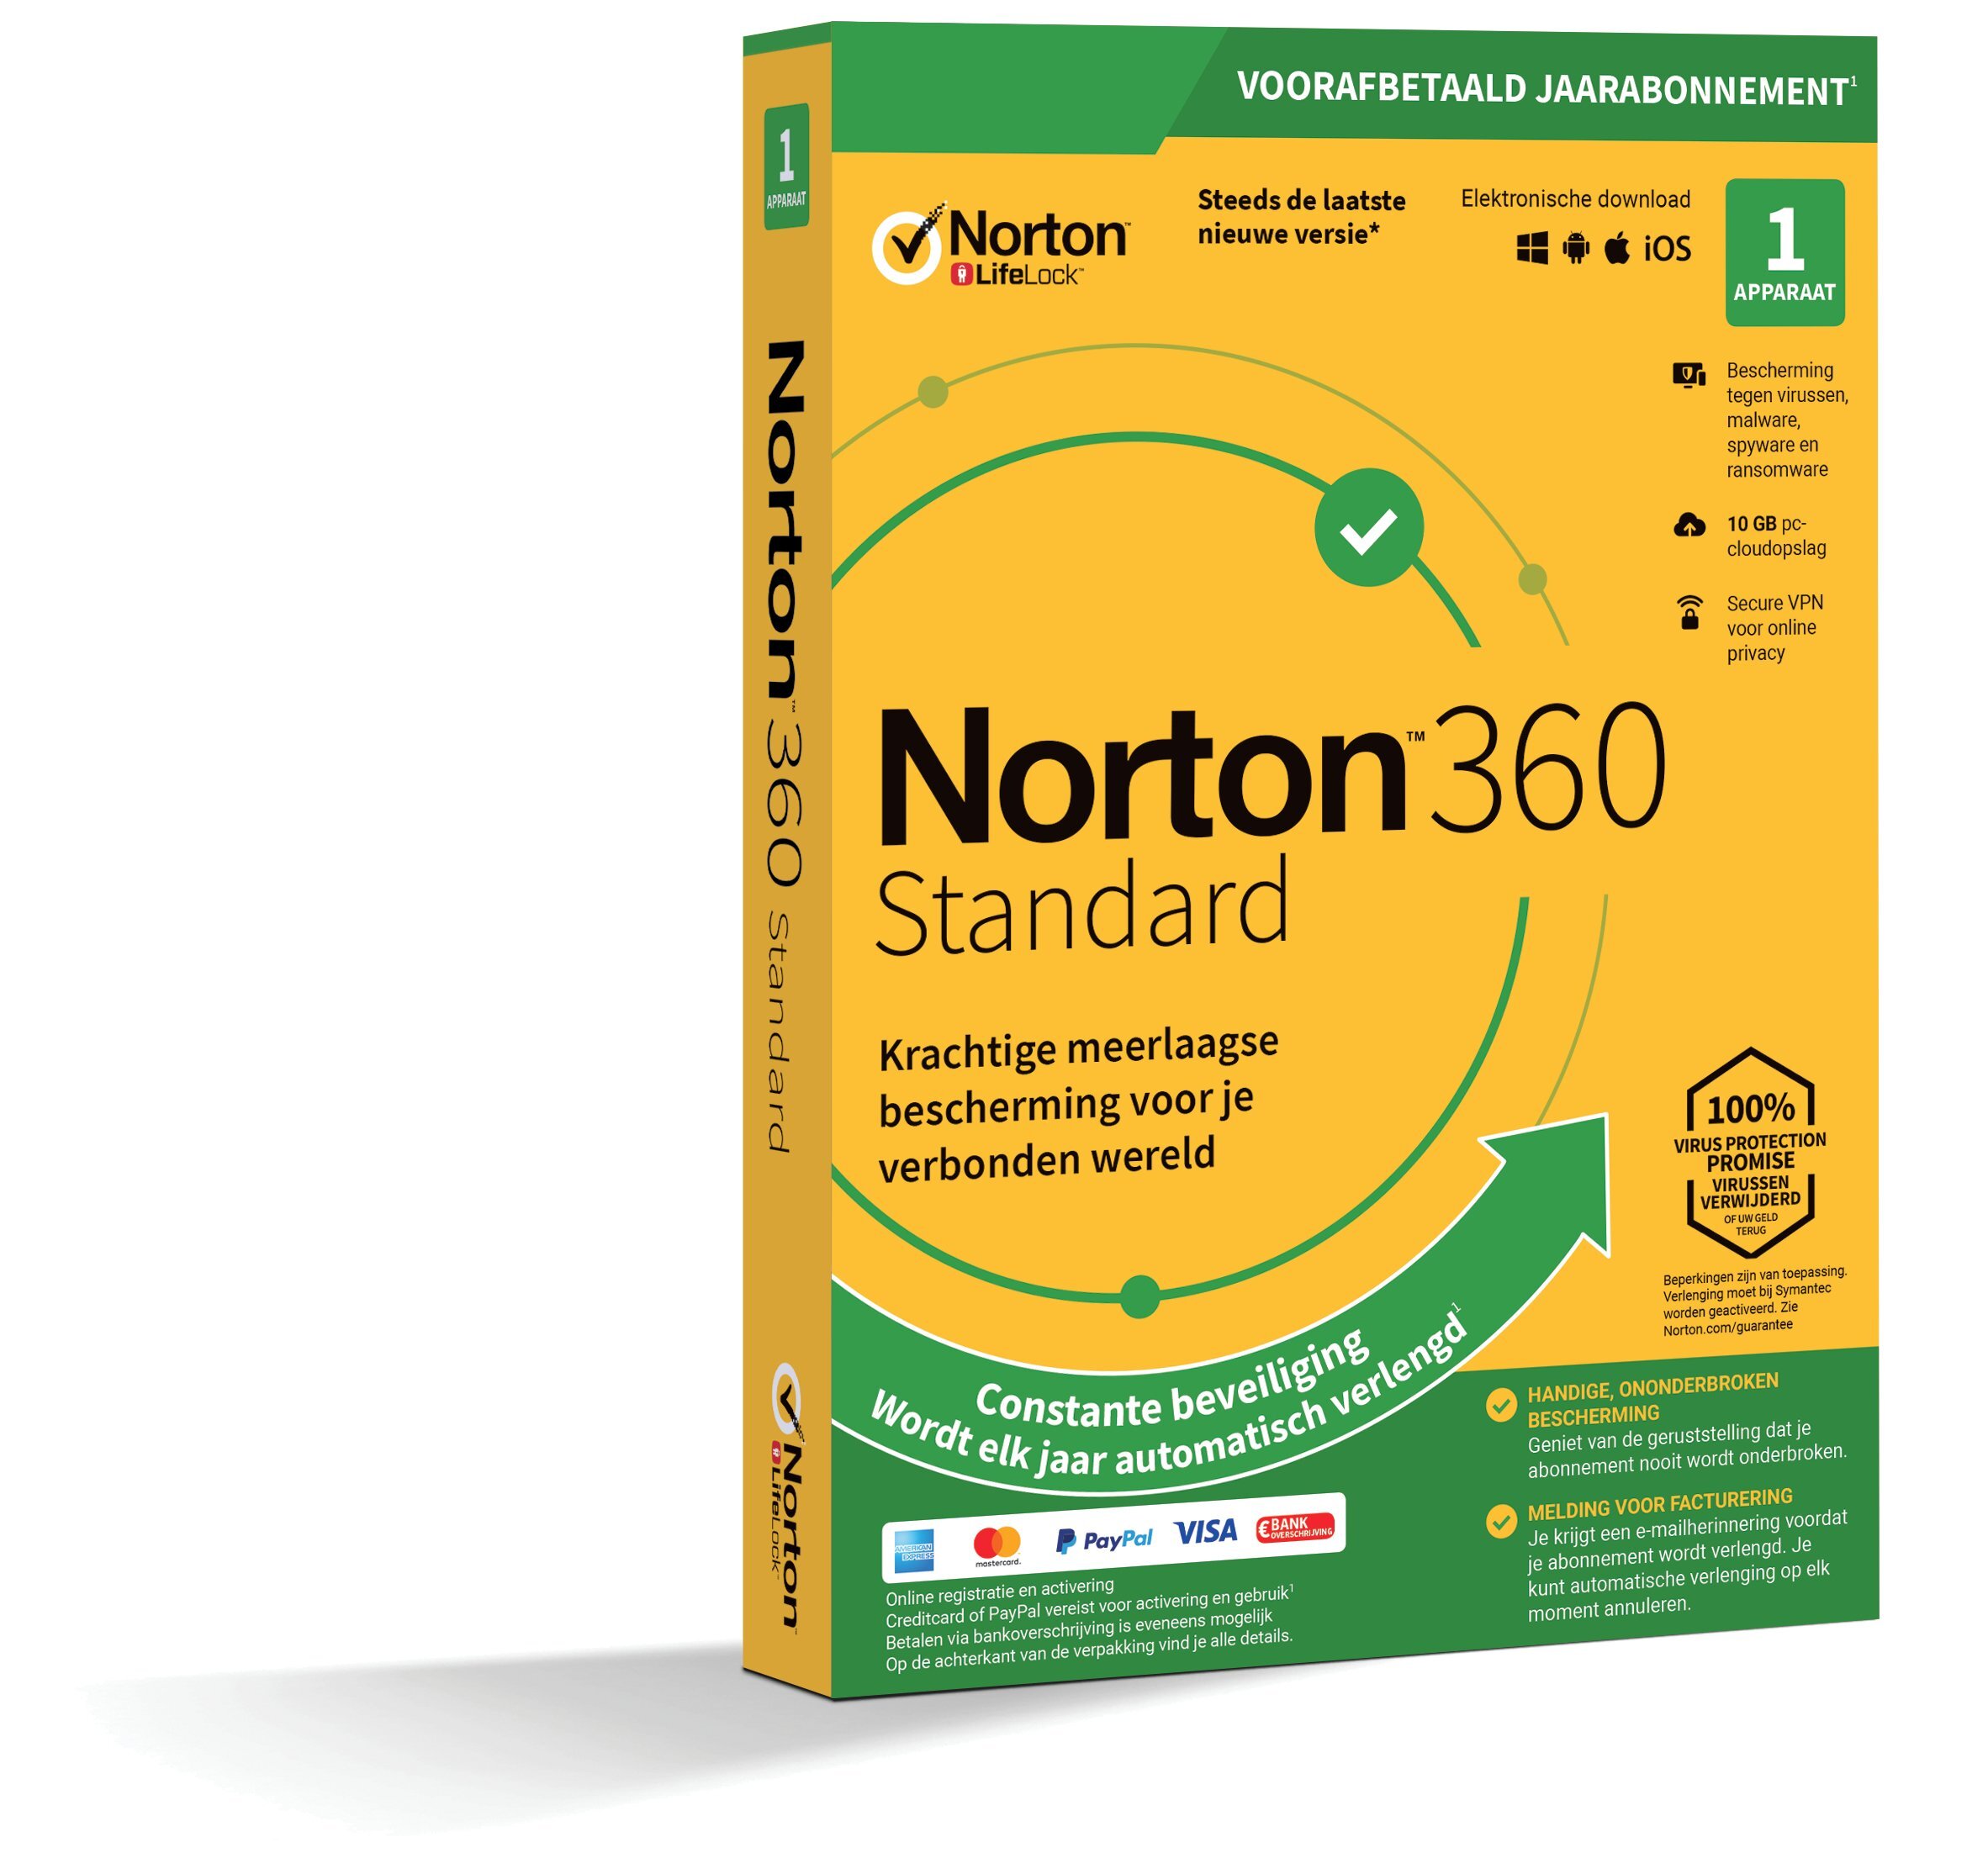 Norton 360 Standard for 1 PC or Mac - 1 Year Subscription